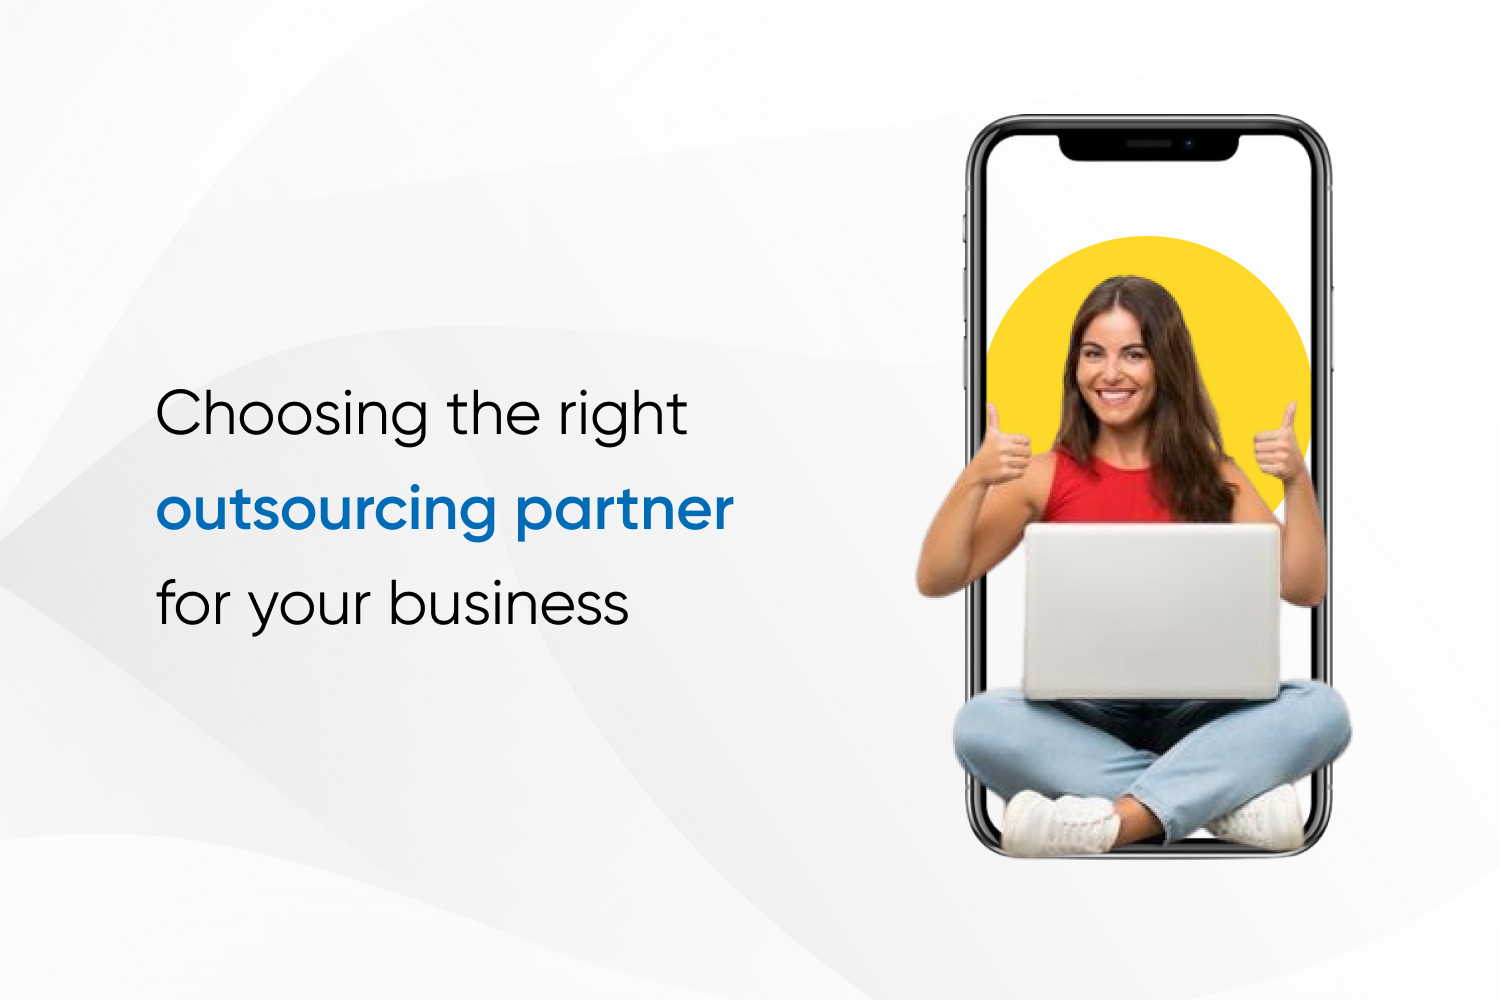 Choosing the right outsourcing partner for your business